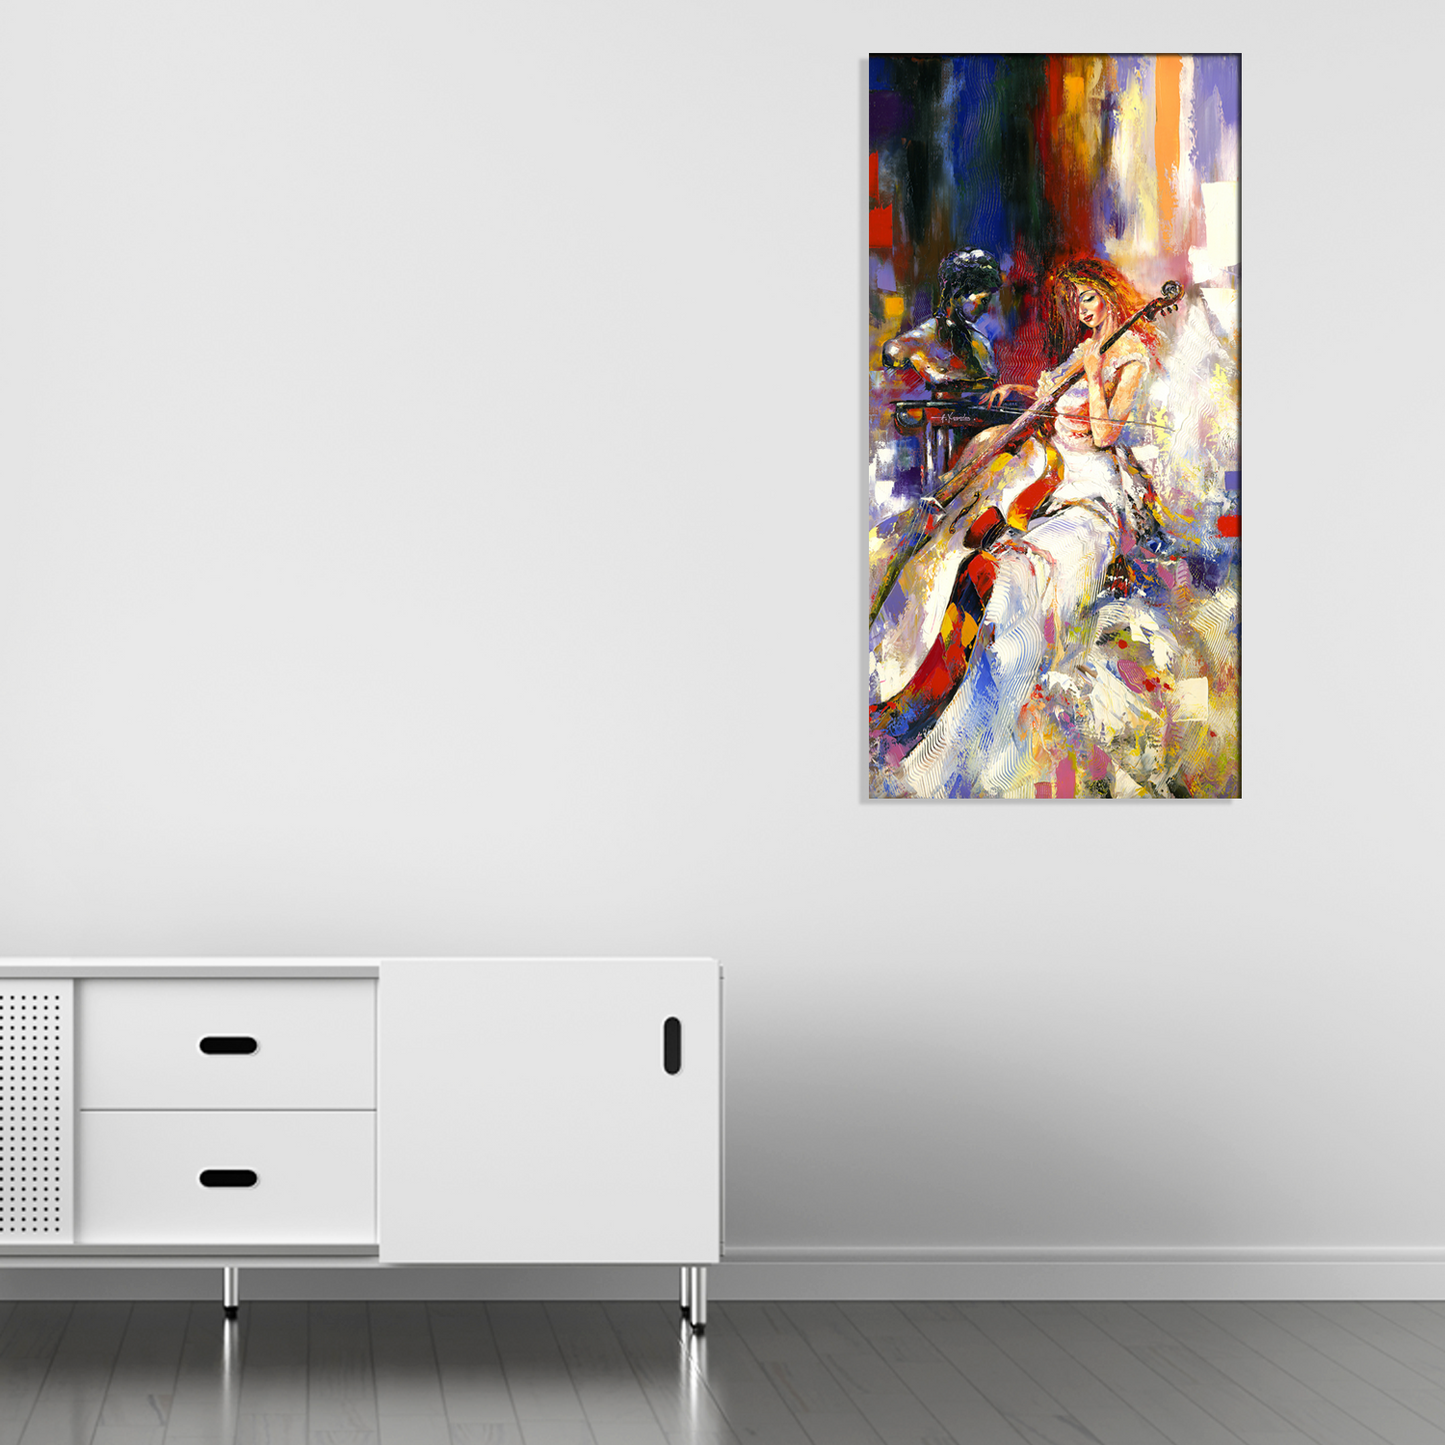 The Girl Plays a Violoncello Abstract Canvas Print Wall Painting